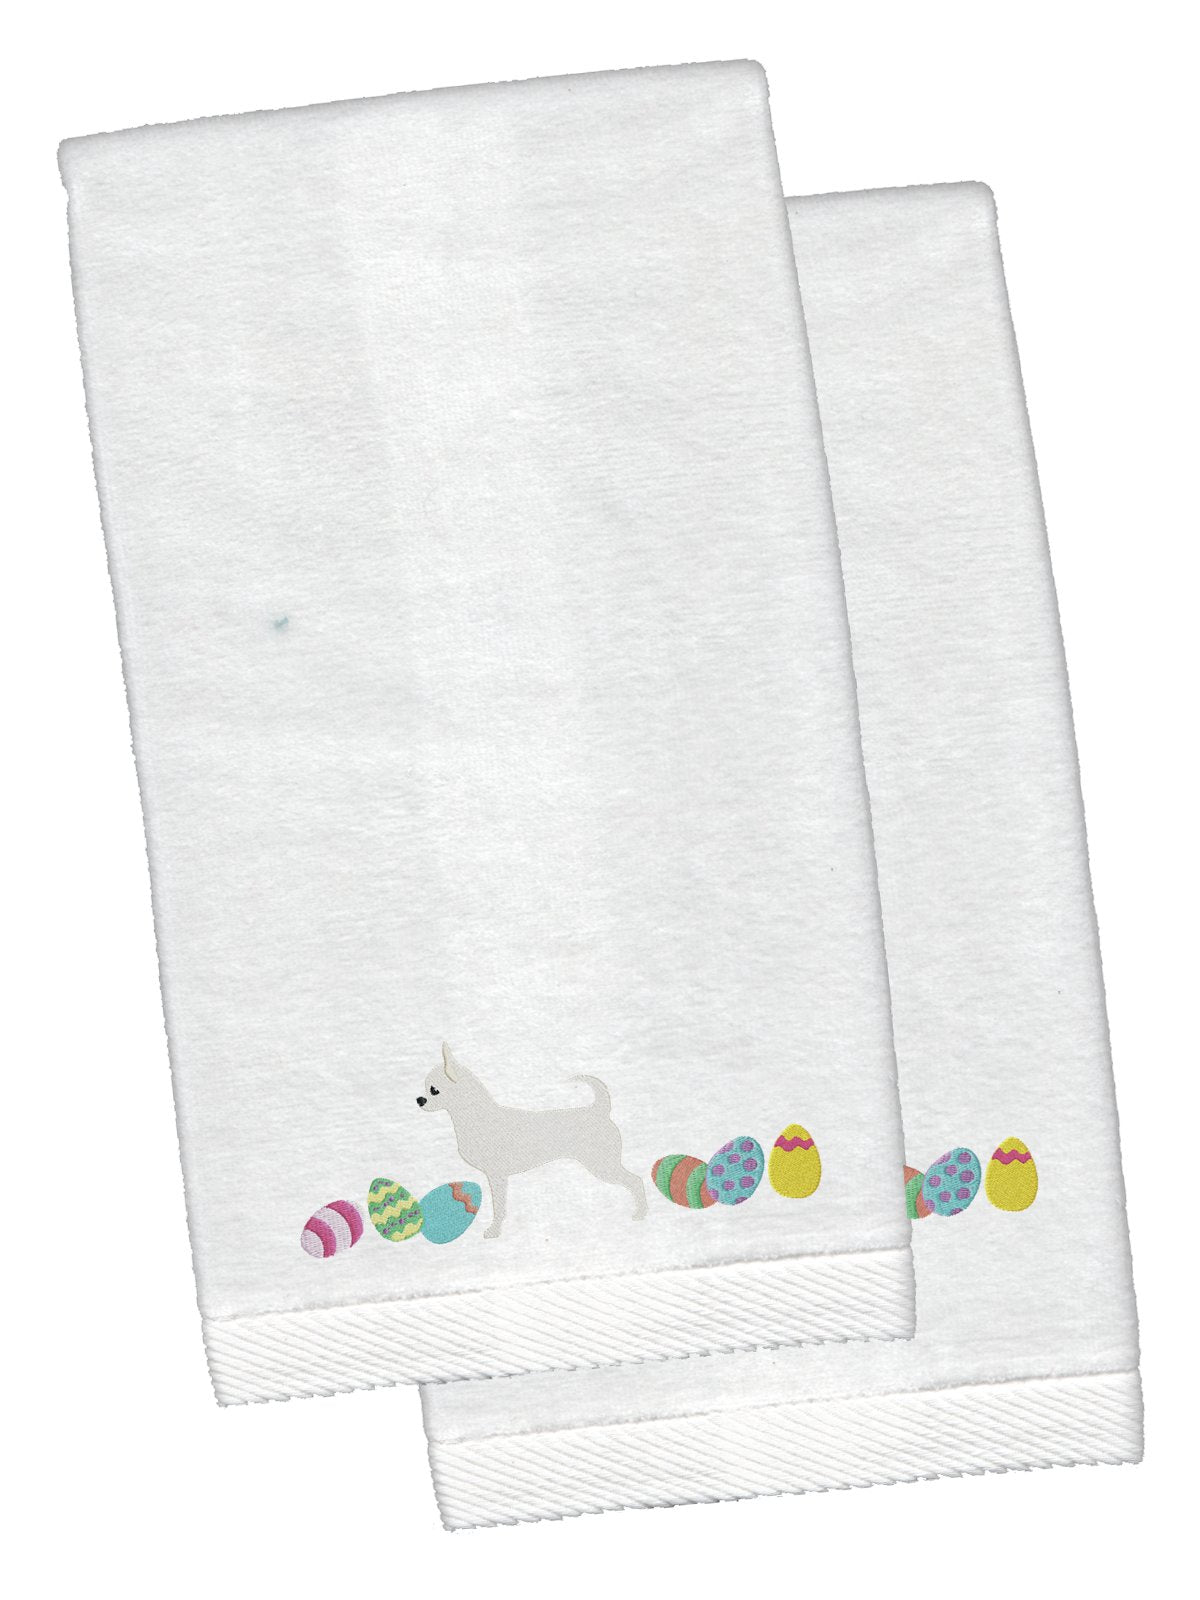 Chihuahua Easter White Embroidered Plush Hand Towel Set of 2 CK1624KTEMB by Caroline's Treasures